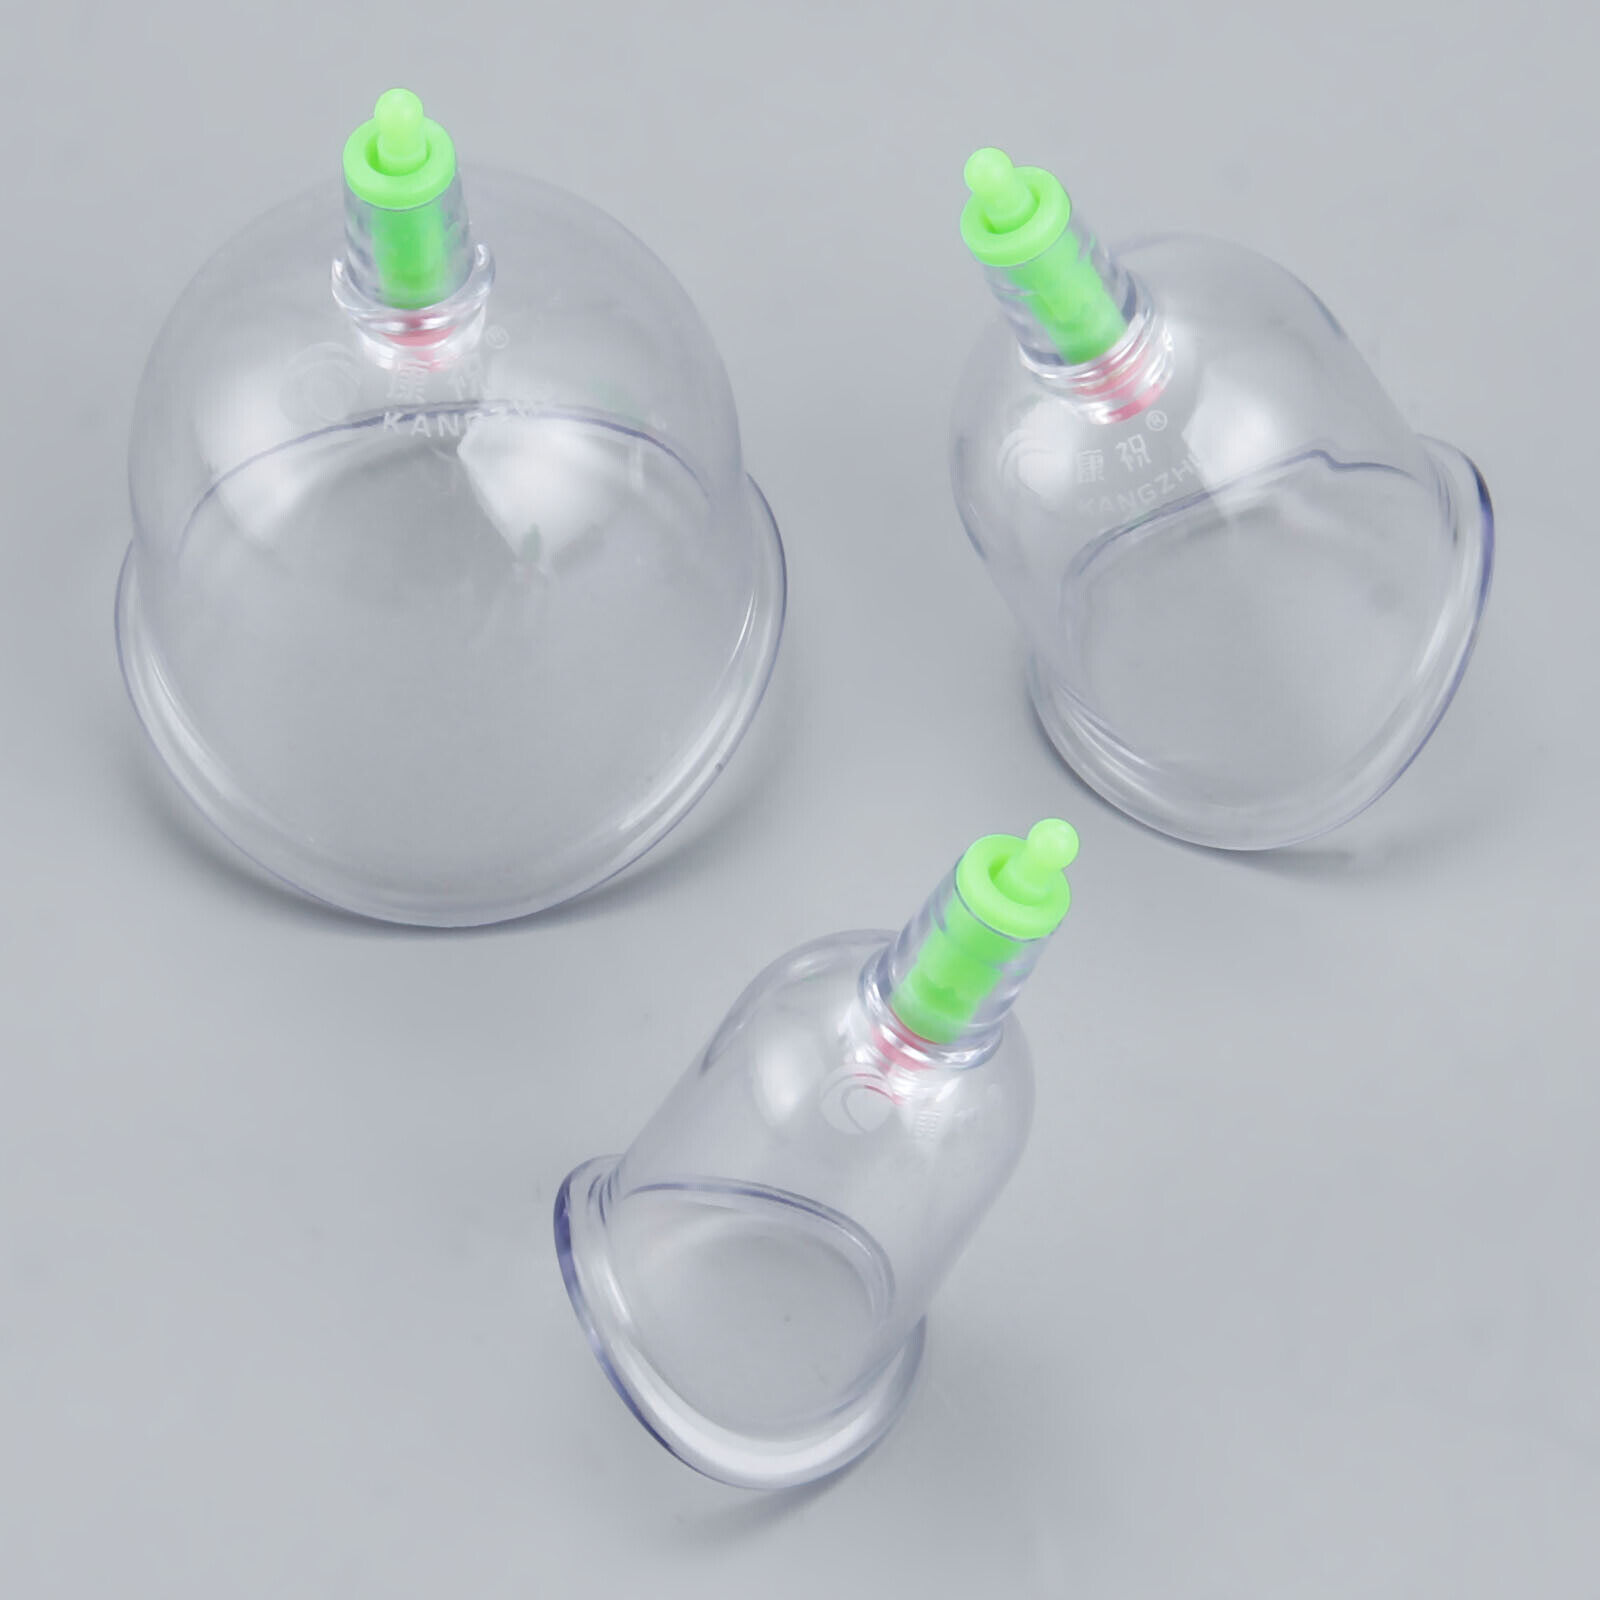 Curved Vacuum Cups Cupping Physical Therapy for Joints Arthritis Massage Set Unbranded/Generic Does Not Apply - фотография #5